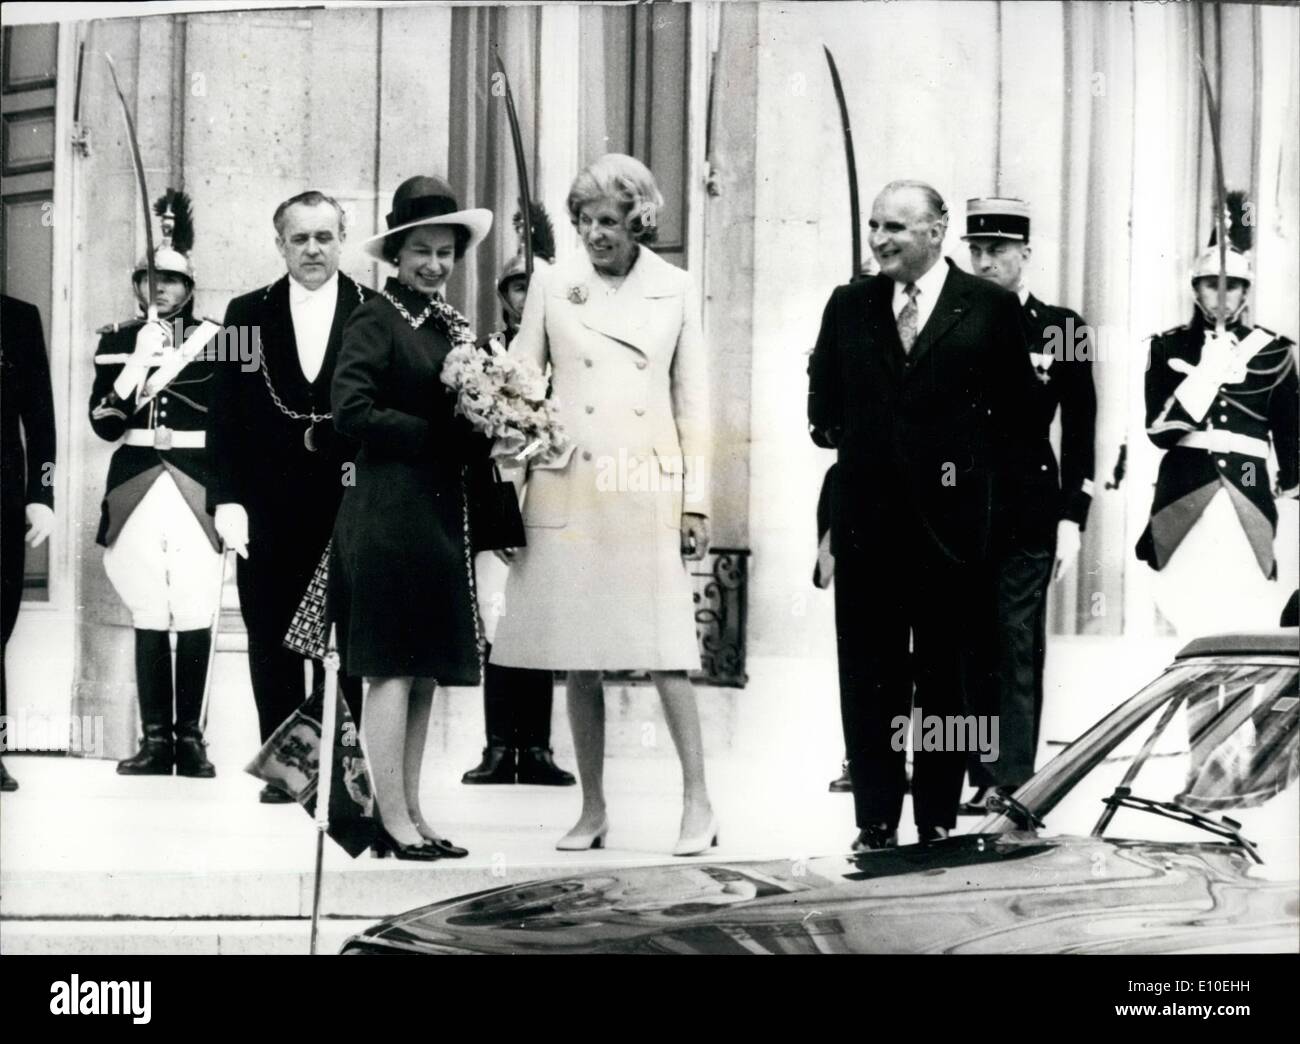 May 16, 1972 - MAY 16th. 1912, QUEEN IN PARIS, PHOTO SHOWS: H,M. THE QUEEN pictured with PRESIDENT and MADAME POMPIDOU,on the steps Of the Zlysee Palace in Paris yesterday where the QUeet, arrived with Prince Philip at the start of a five day State visit. Stock Photo